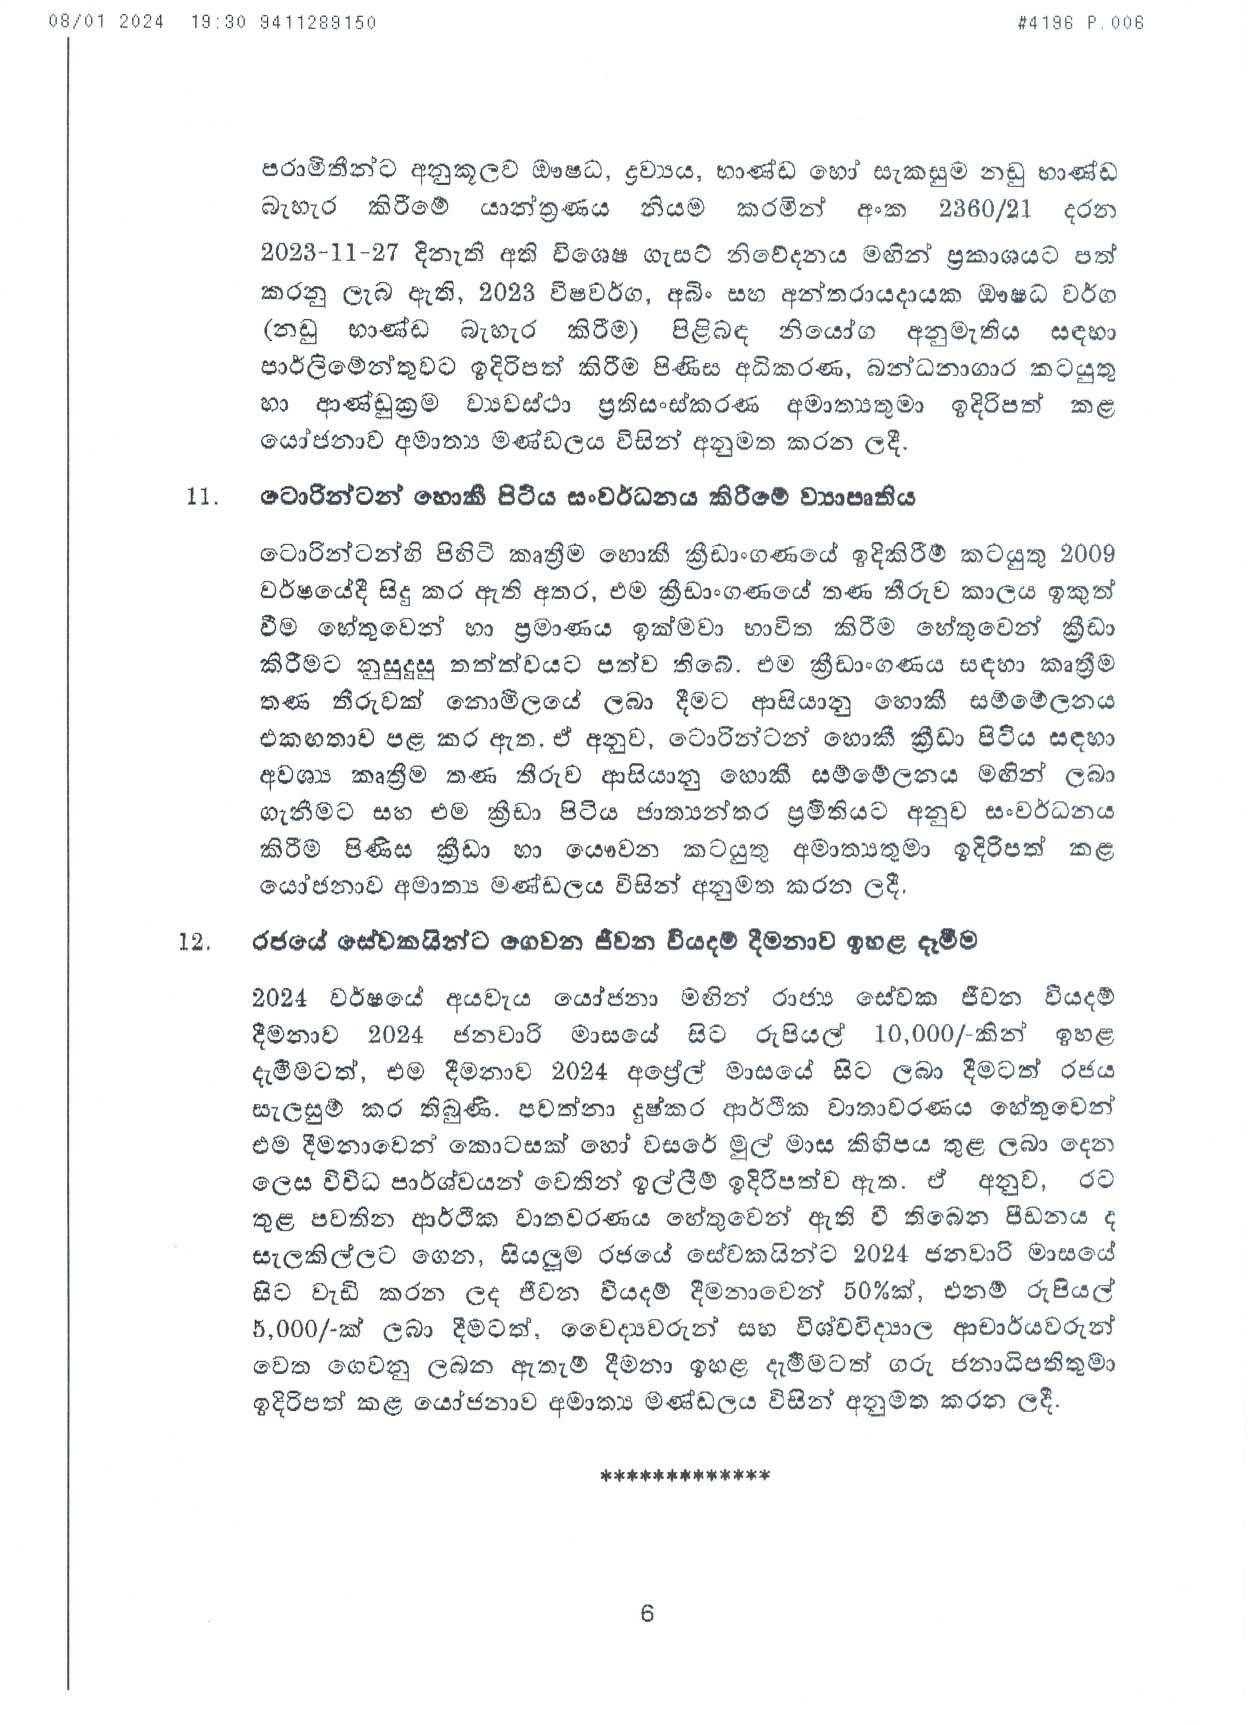 Cabinet Decision on 08.01.2024 page 006